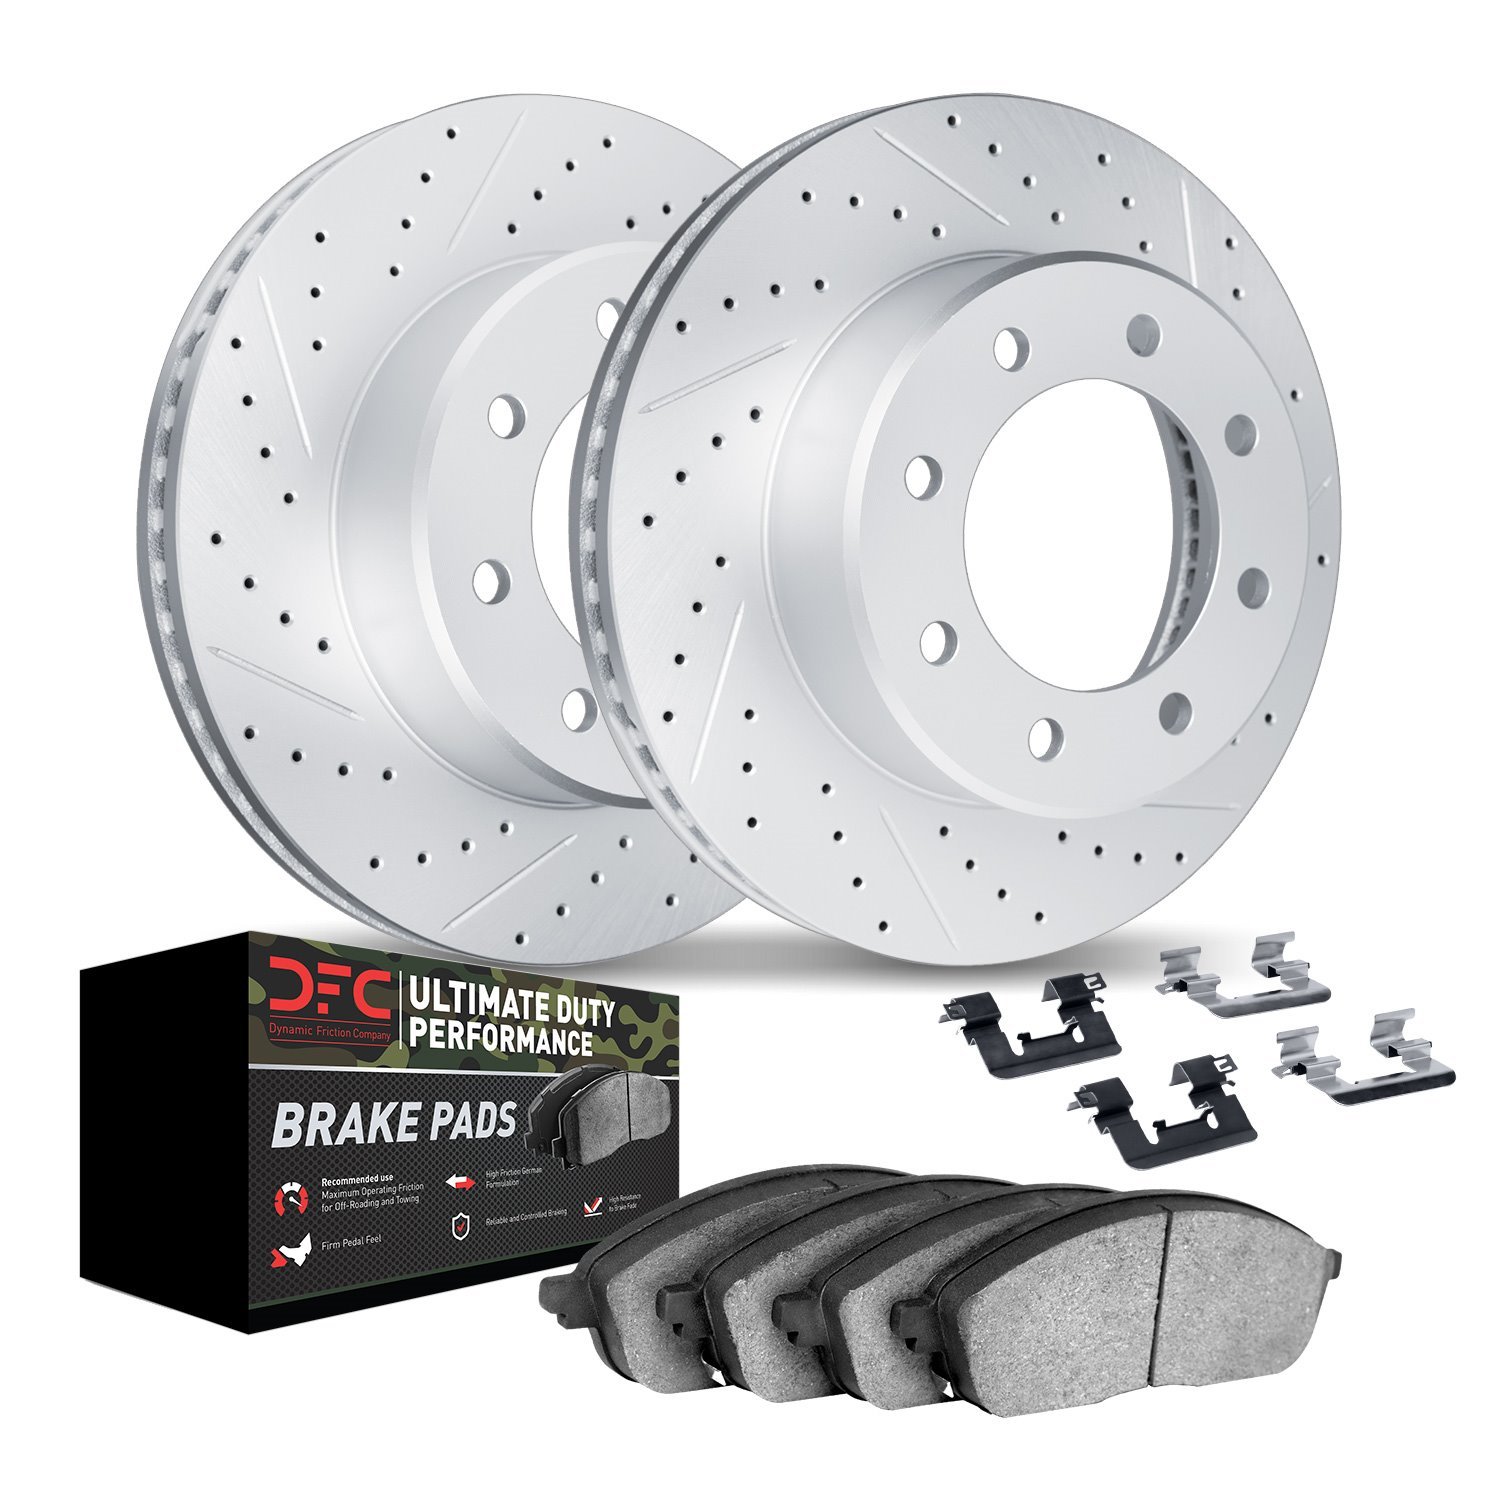 2412-54038 Geoperformance Drilled/Slotted Brake Rotors with Ultimate-Duty Brake Pads Kit & Hardware, 1999-2005 Ford/Lincoln/Merc